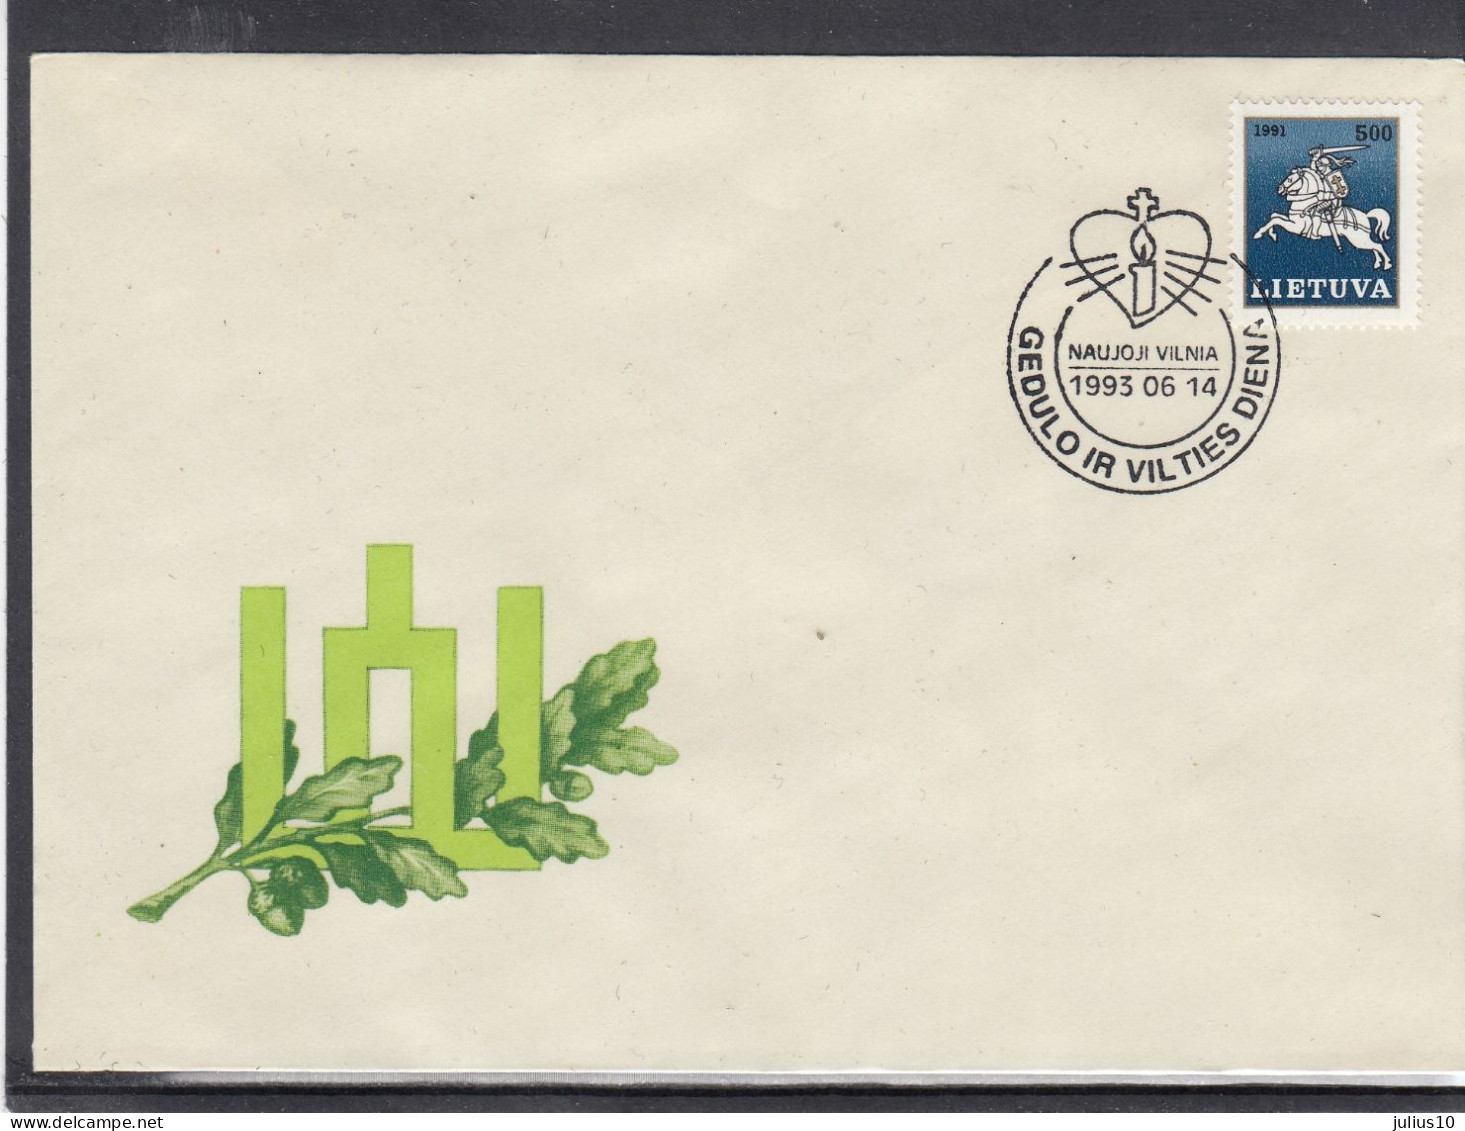 LITHUANIA 1993 Cover Special Cancel Mourning Day #LTV226 - Lituania